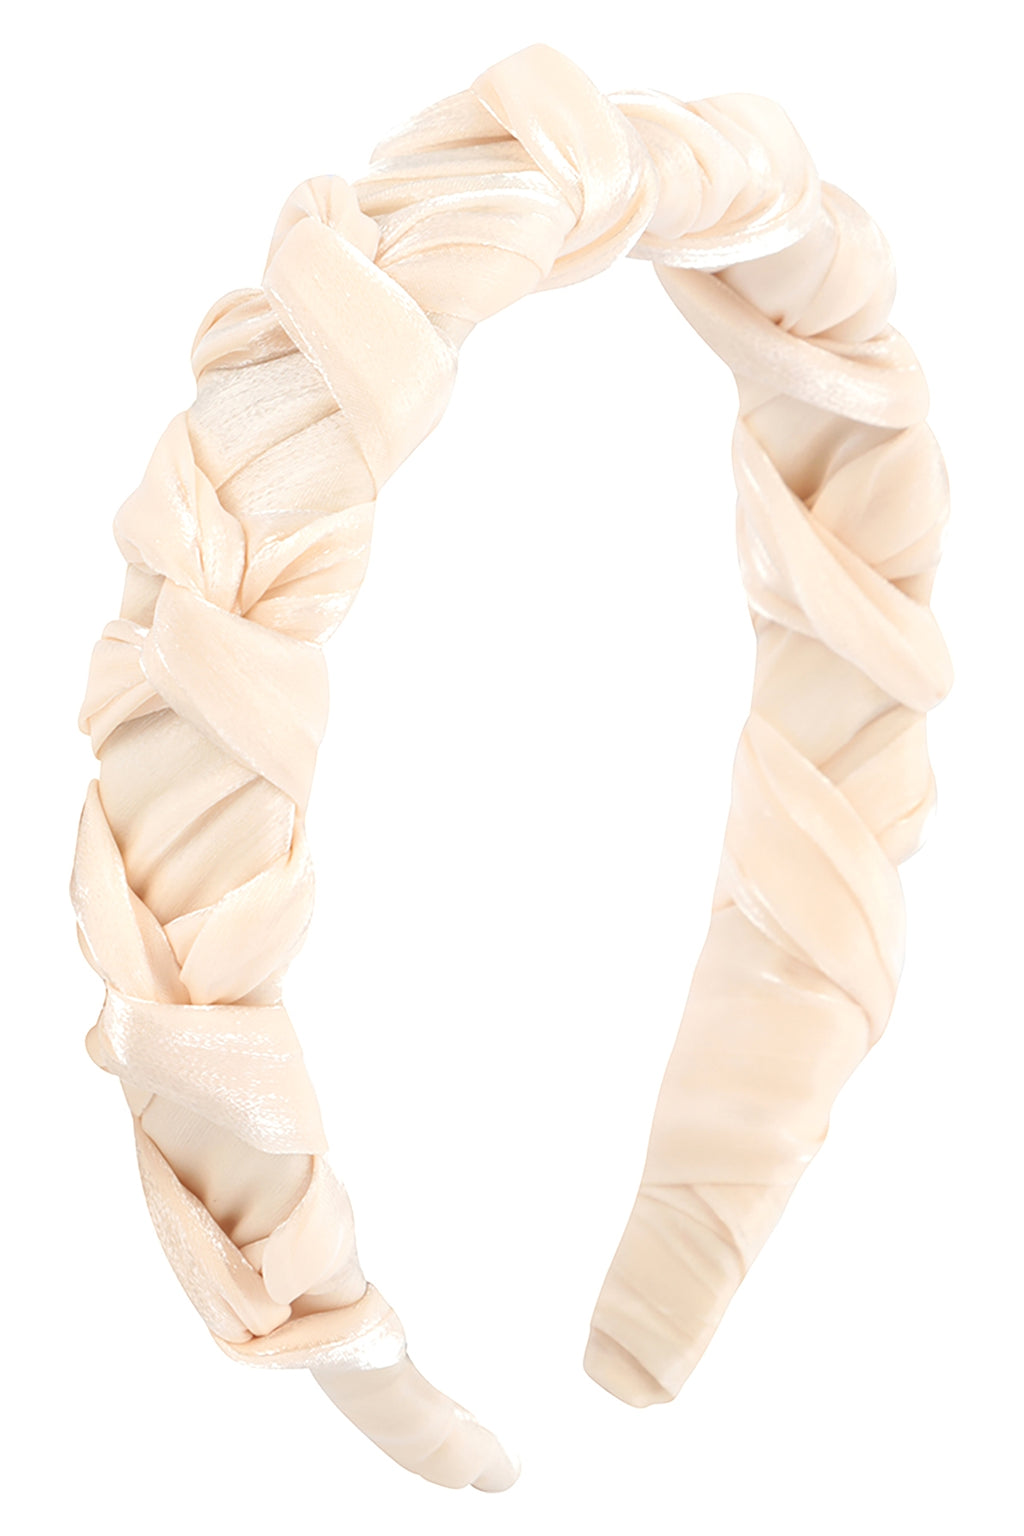 Braided Knot Leather Headband Hair Accessories Natural - Pack of 6